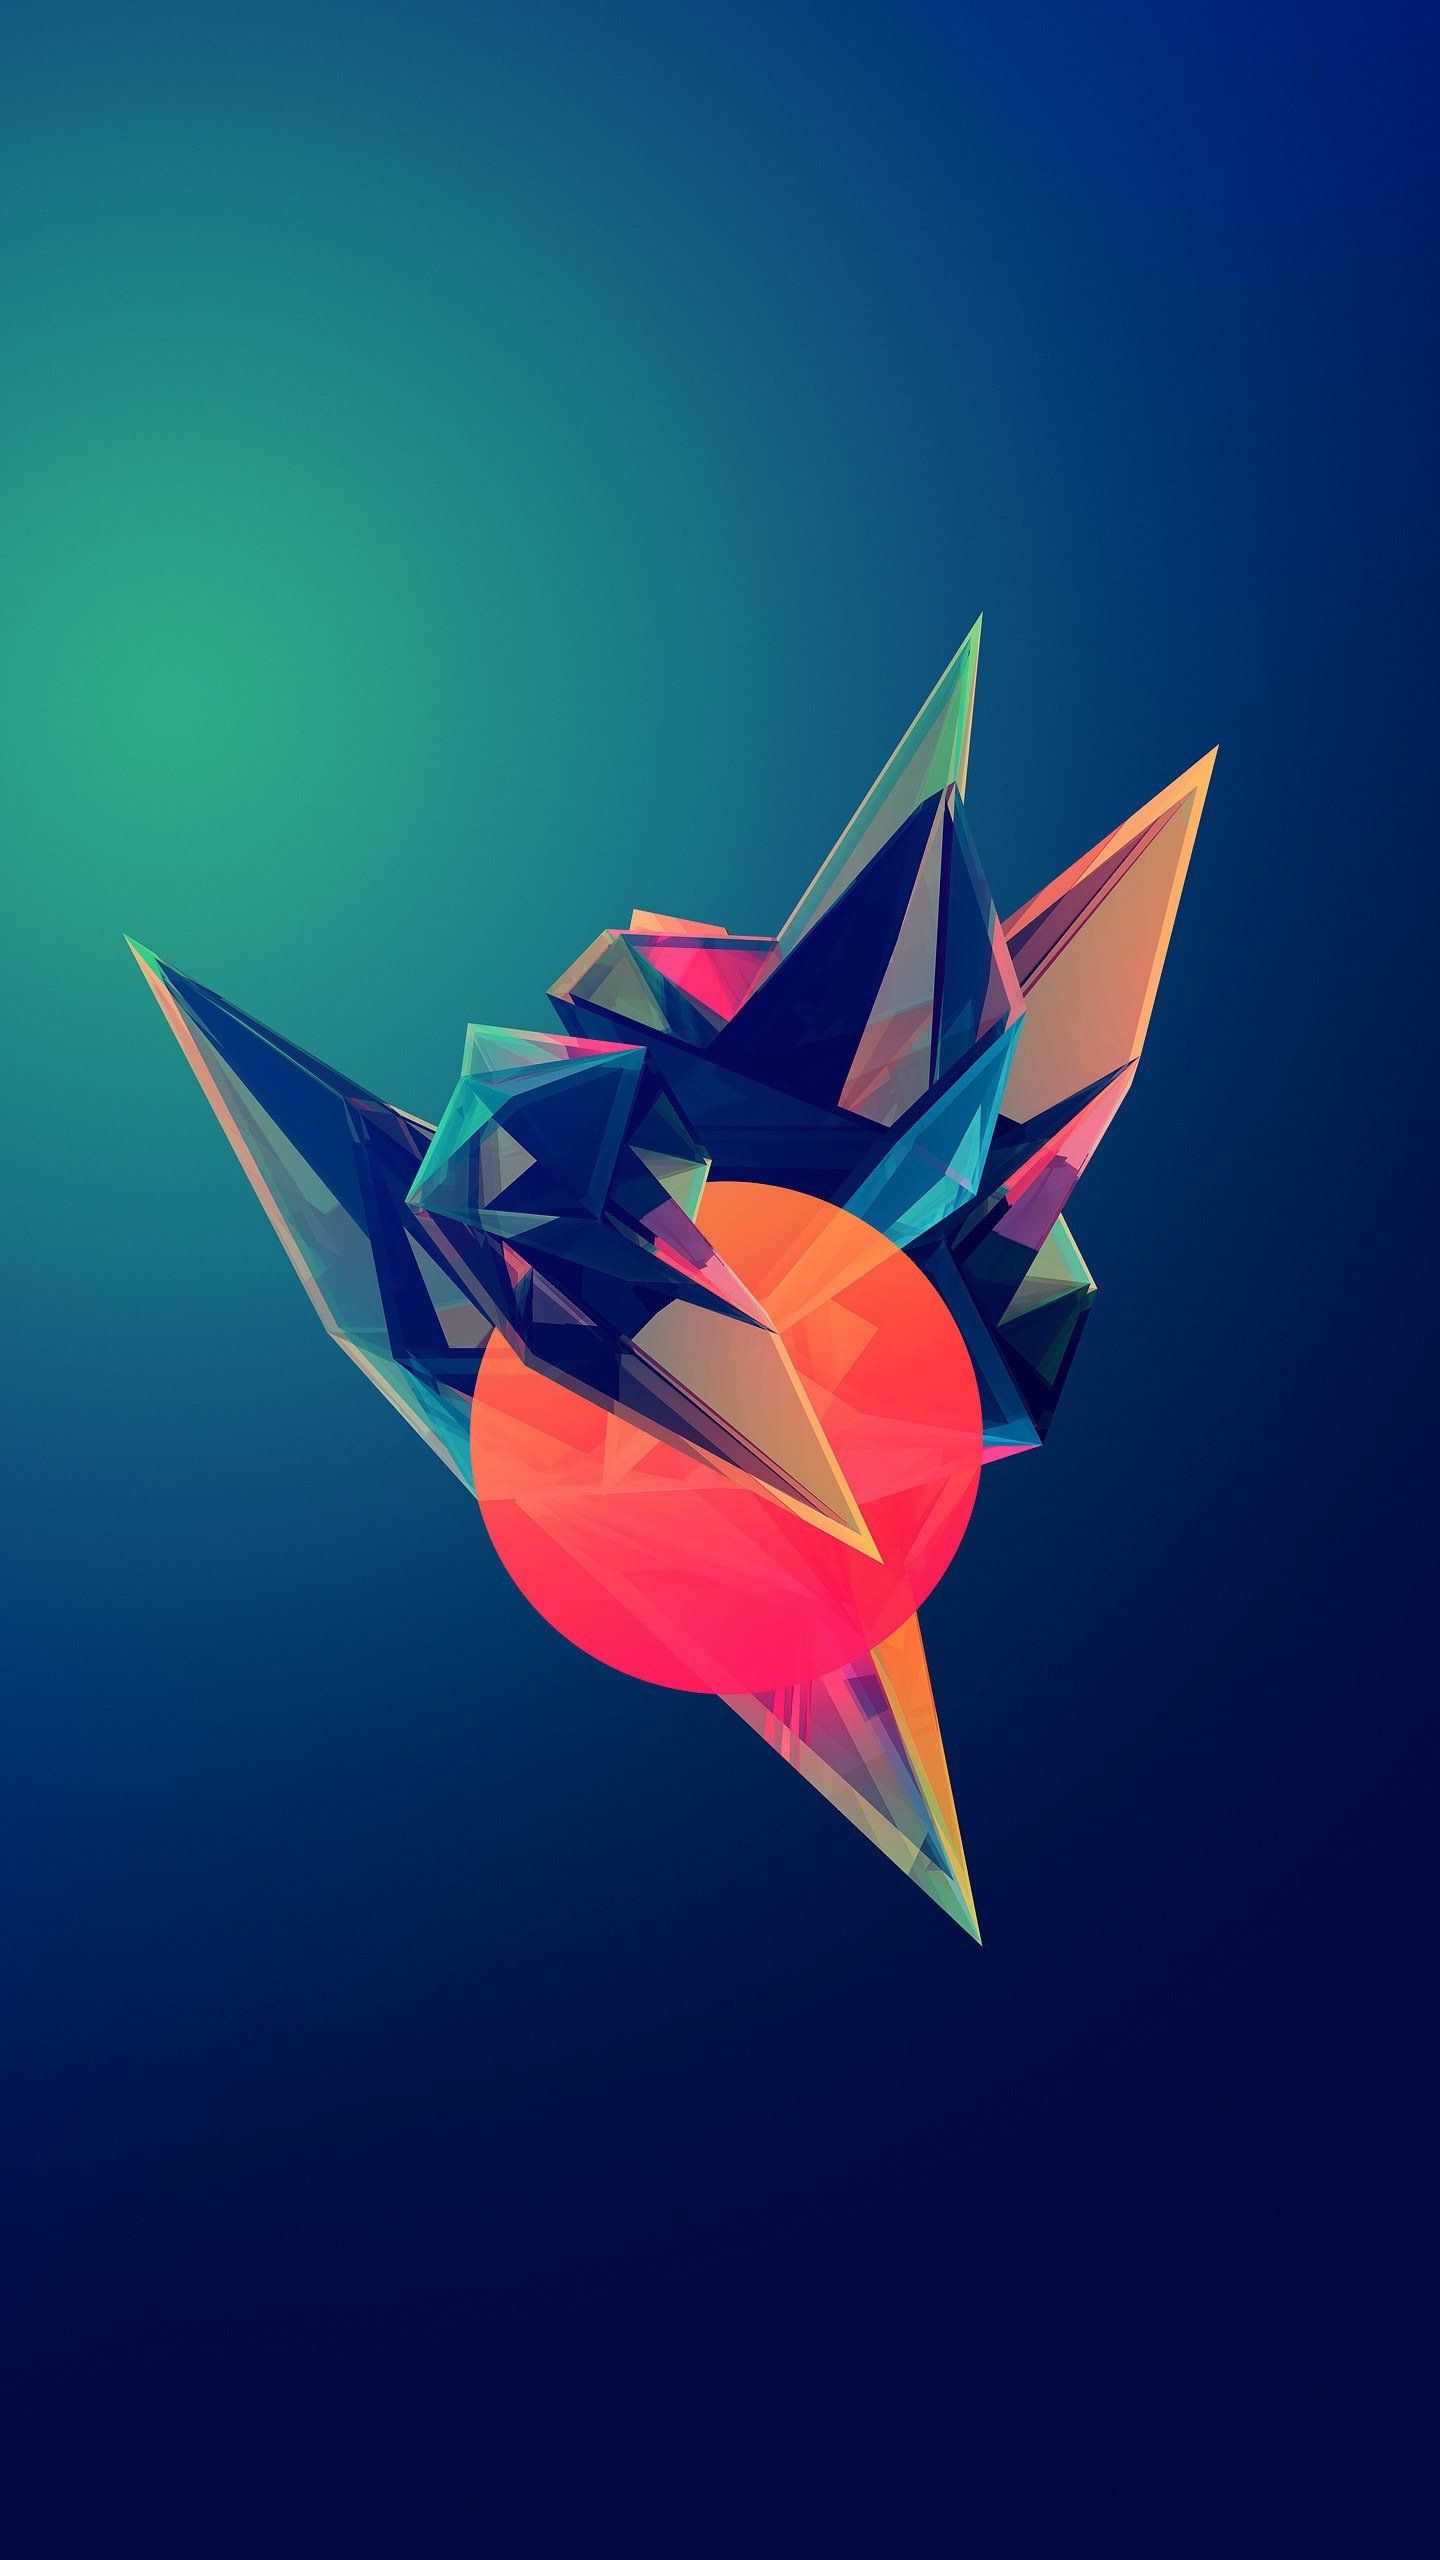 Low Poly Wallpapers [2560x1440] rwallpapers Hd phone